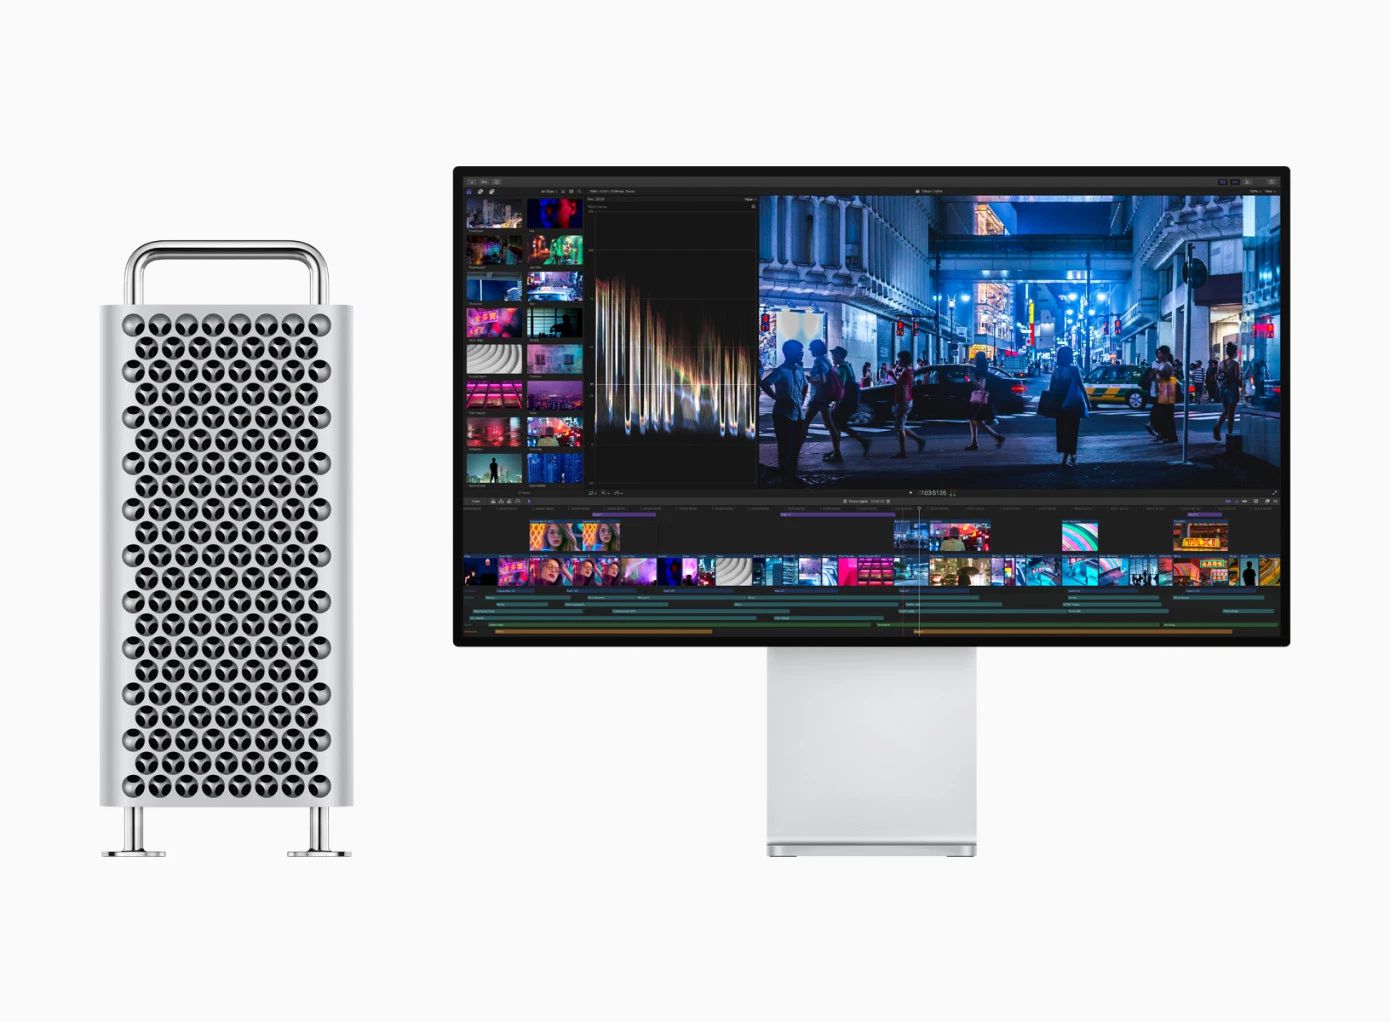 Apple’s Mac Pro Ships in December With Maximum 8TB of Storage